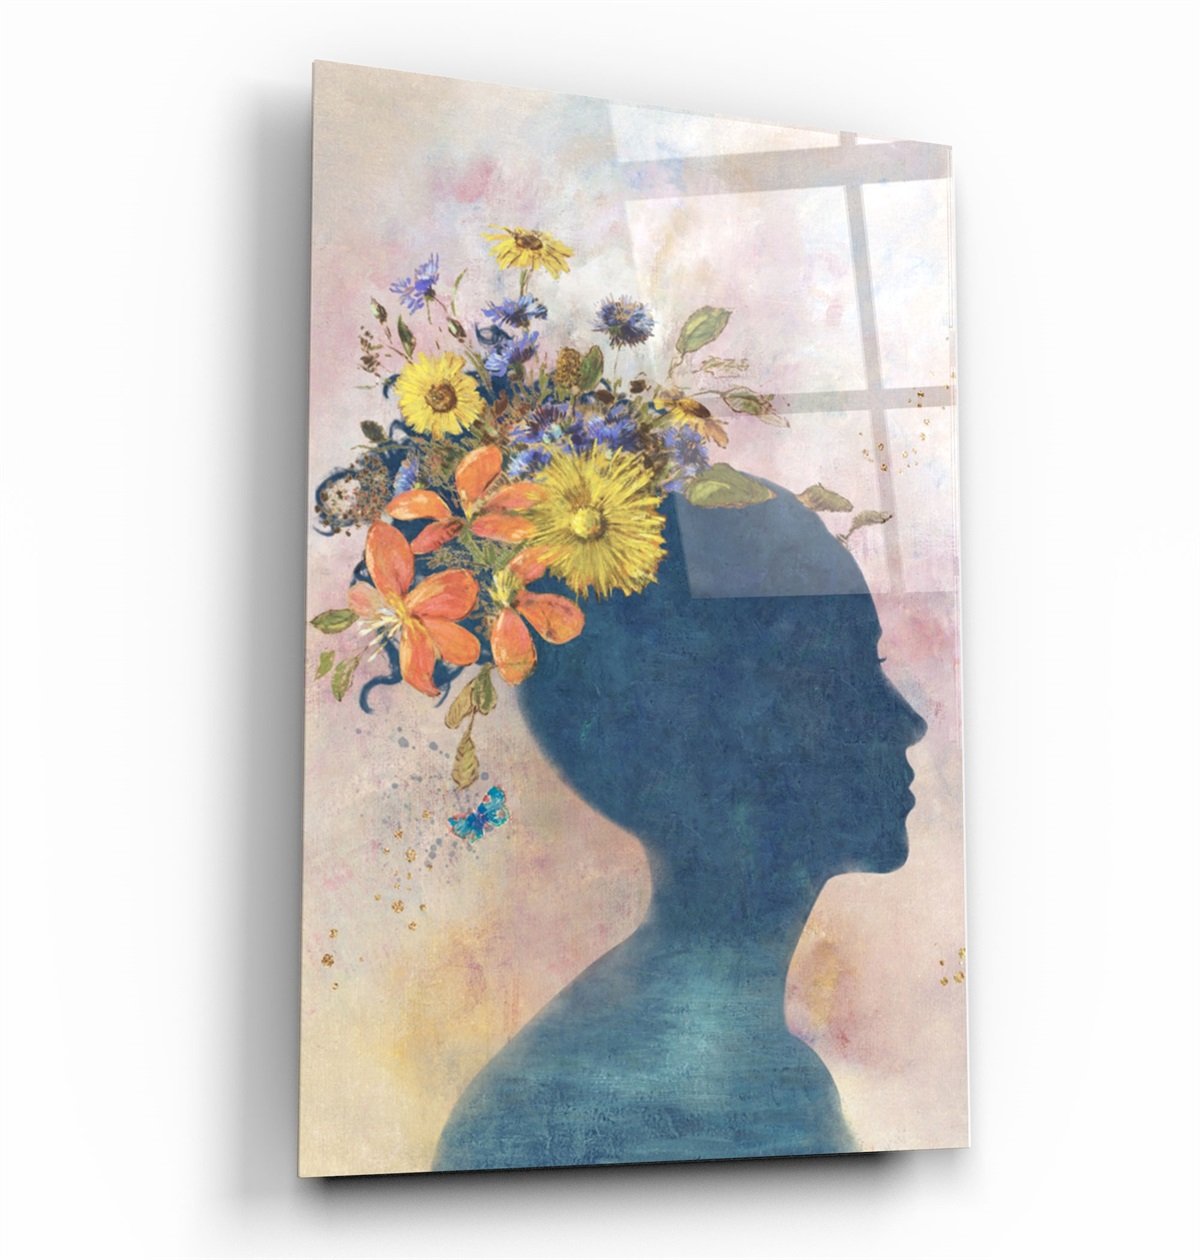 ・"Abstract Women and Flowers"・Glass Wall Art